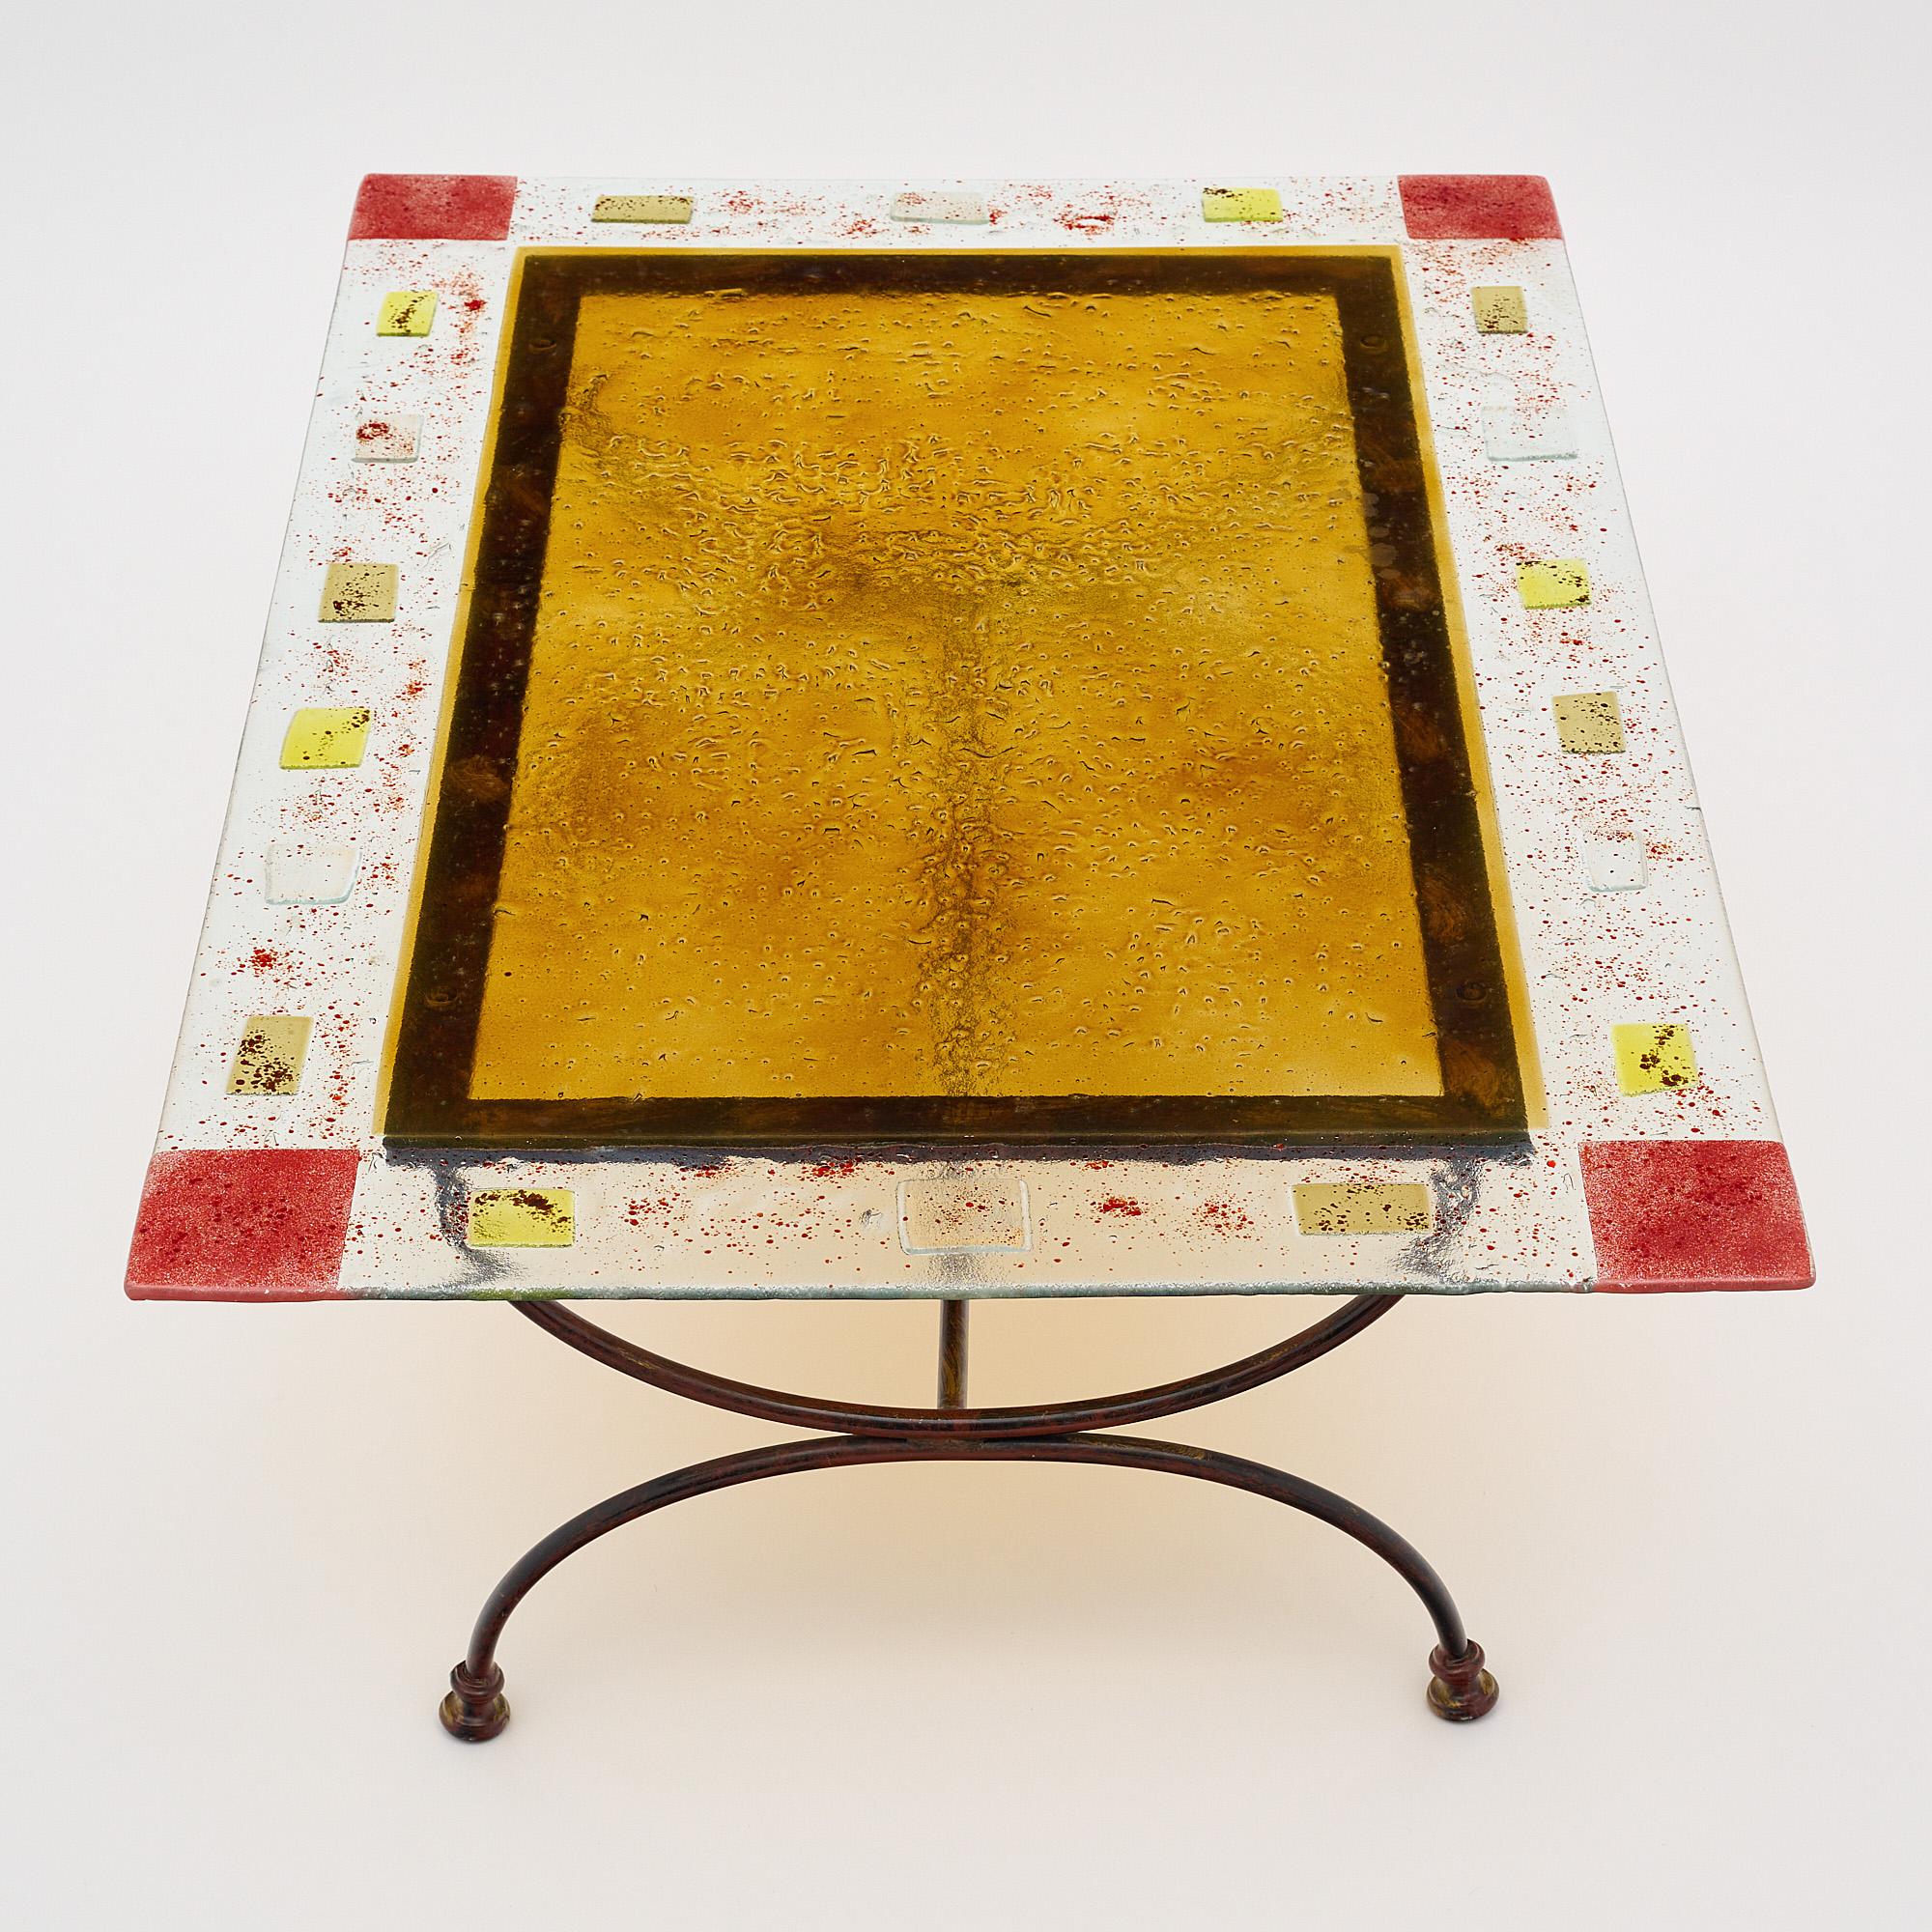 Italian Vintage Murano Glass Topped Coffee Table For Sale